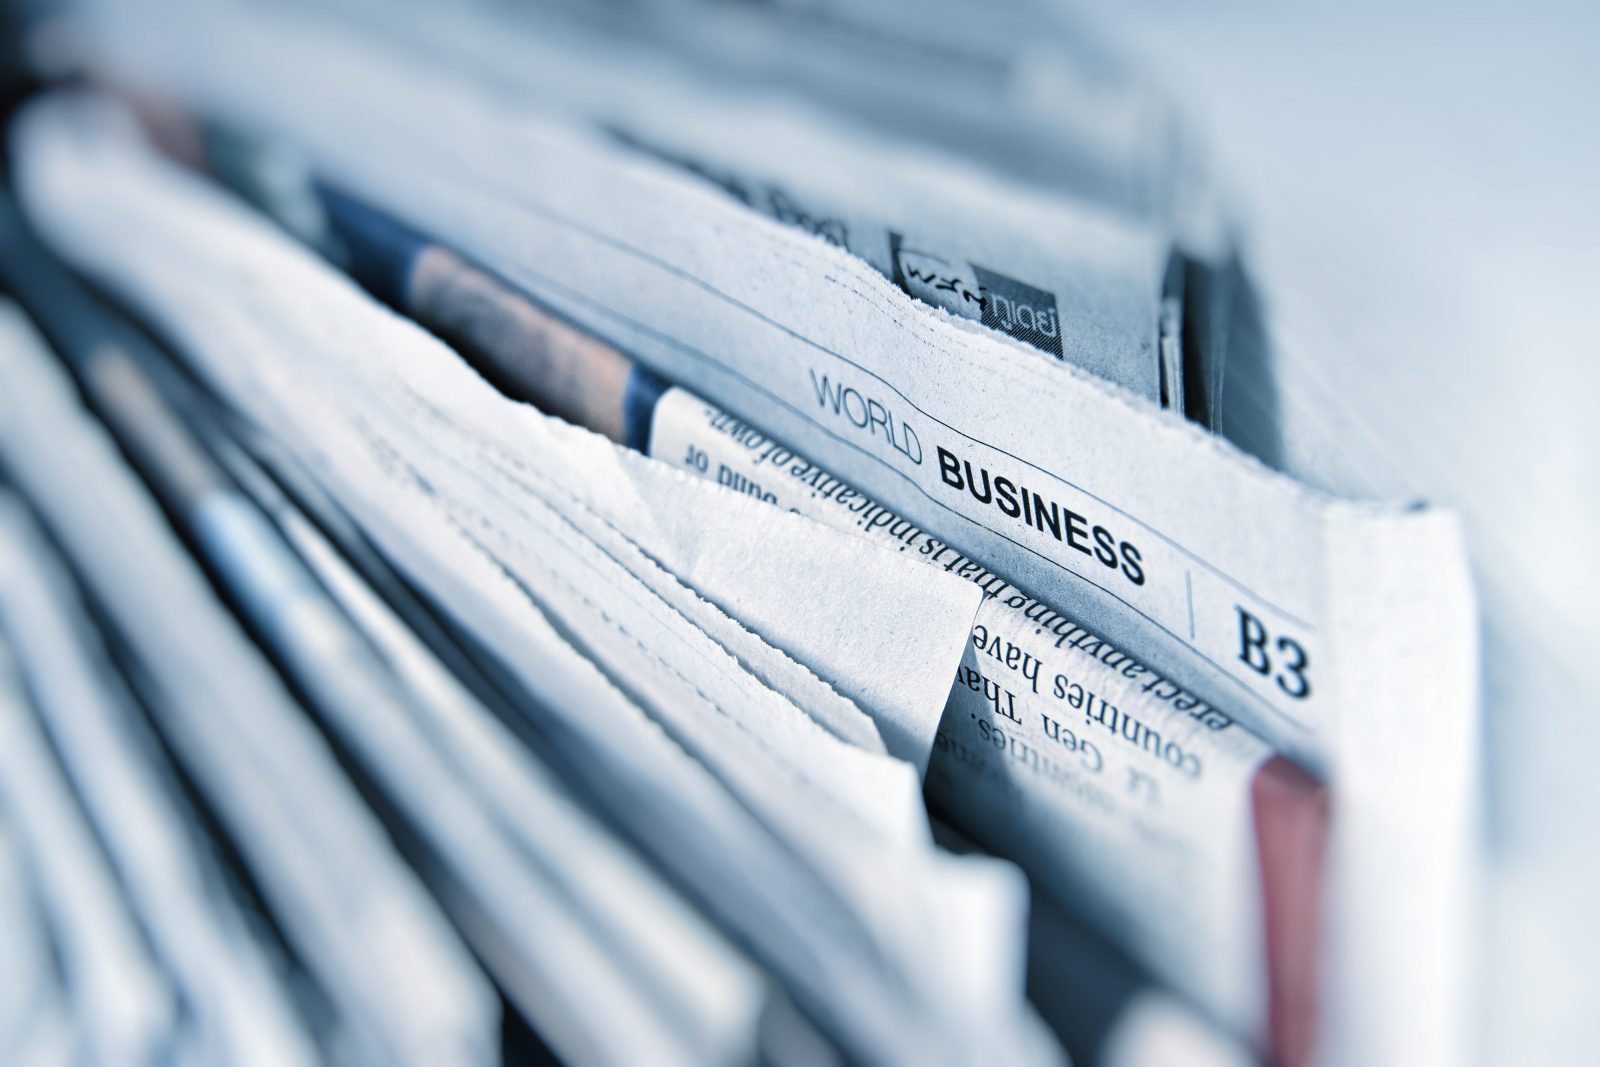 Digital Marketing News Roundup: 9 Headlines You Don’t Want to Miss